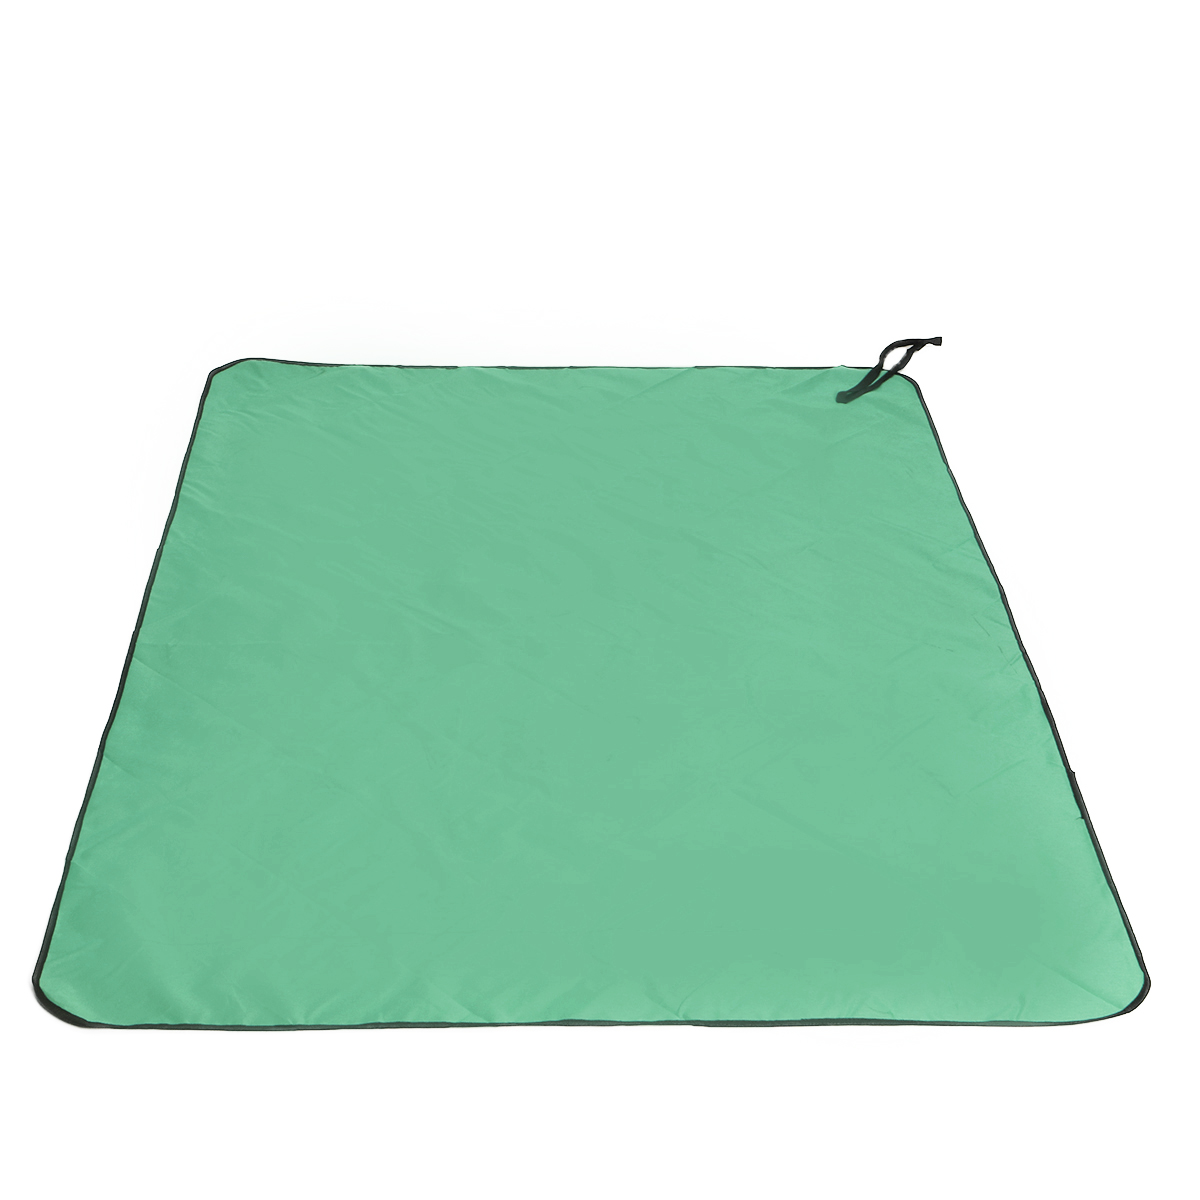 Outdoor-Spring-Travel-Beach-Oxford-Cloth-Floor-Mat-Picnic-Cloth-Waterproof-Moisture-proof-Camping-Pi-1658109-10